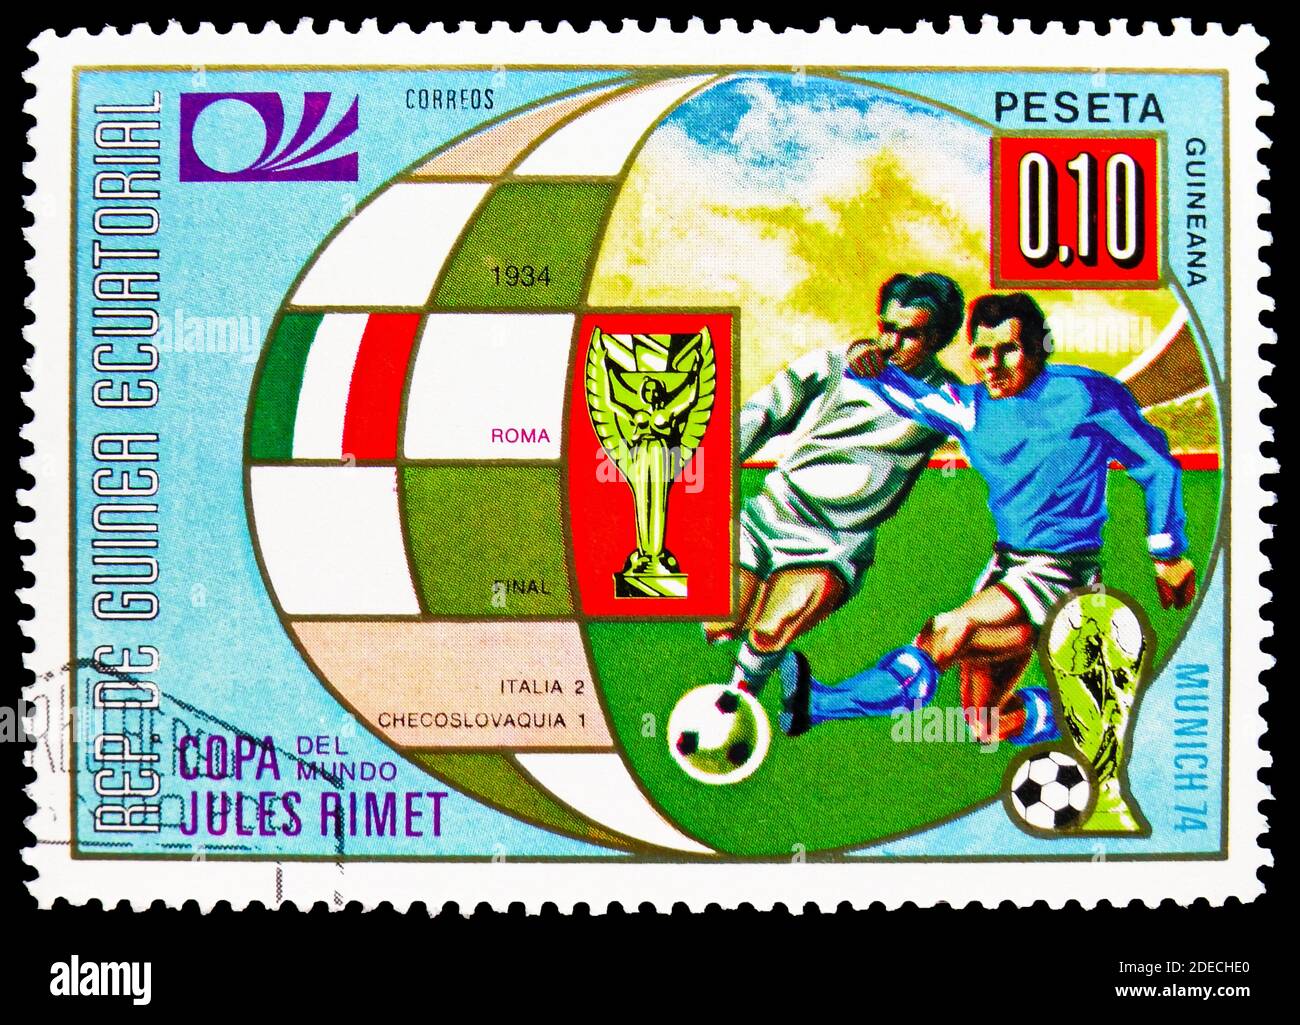 MOSCOW, RUSSIA - OCTOBER 17, 2020: Postage stamp printed in Equatorial Guinea shows Rome, Football World Cup 1974, Germany: Earlier World Cup finals s Stock Photo